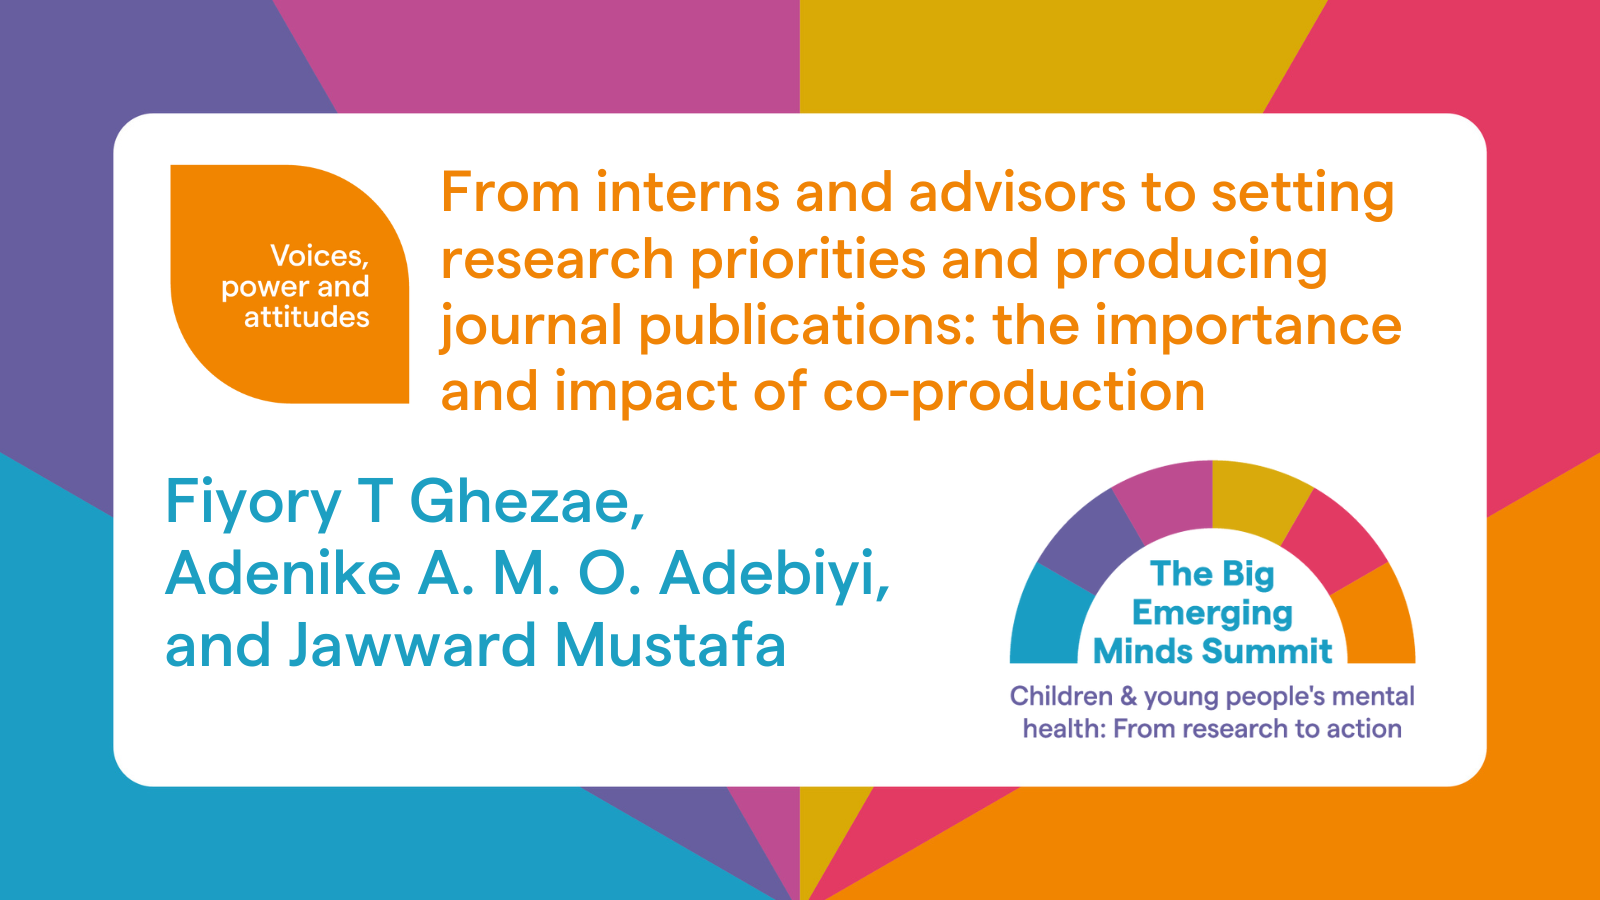 From interns and advisors to setting research priorities and producing journal publications: the importance and impact of coproduction